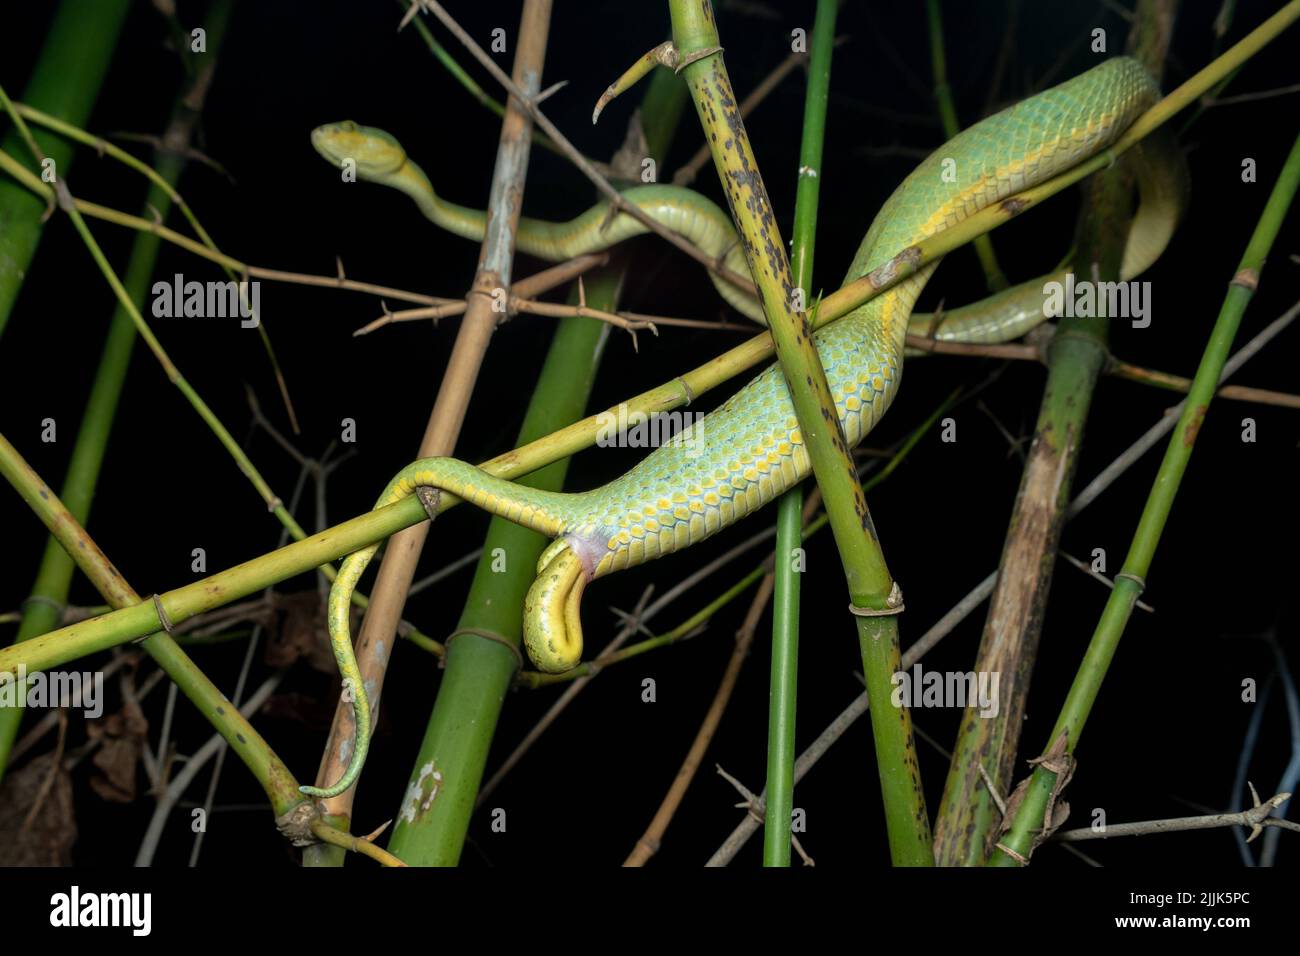 The babies emerge. Valsad, India: THESE INCREDIBLE images capture a rare site of a snake giving birth, multiple tails extending from its body as the b Stock Photo